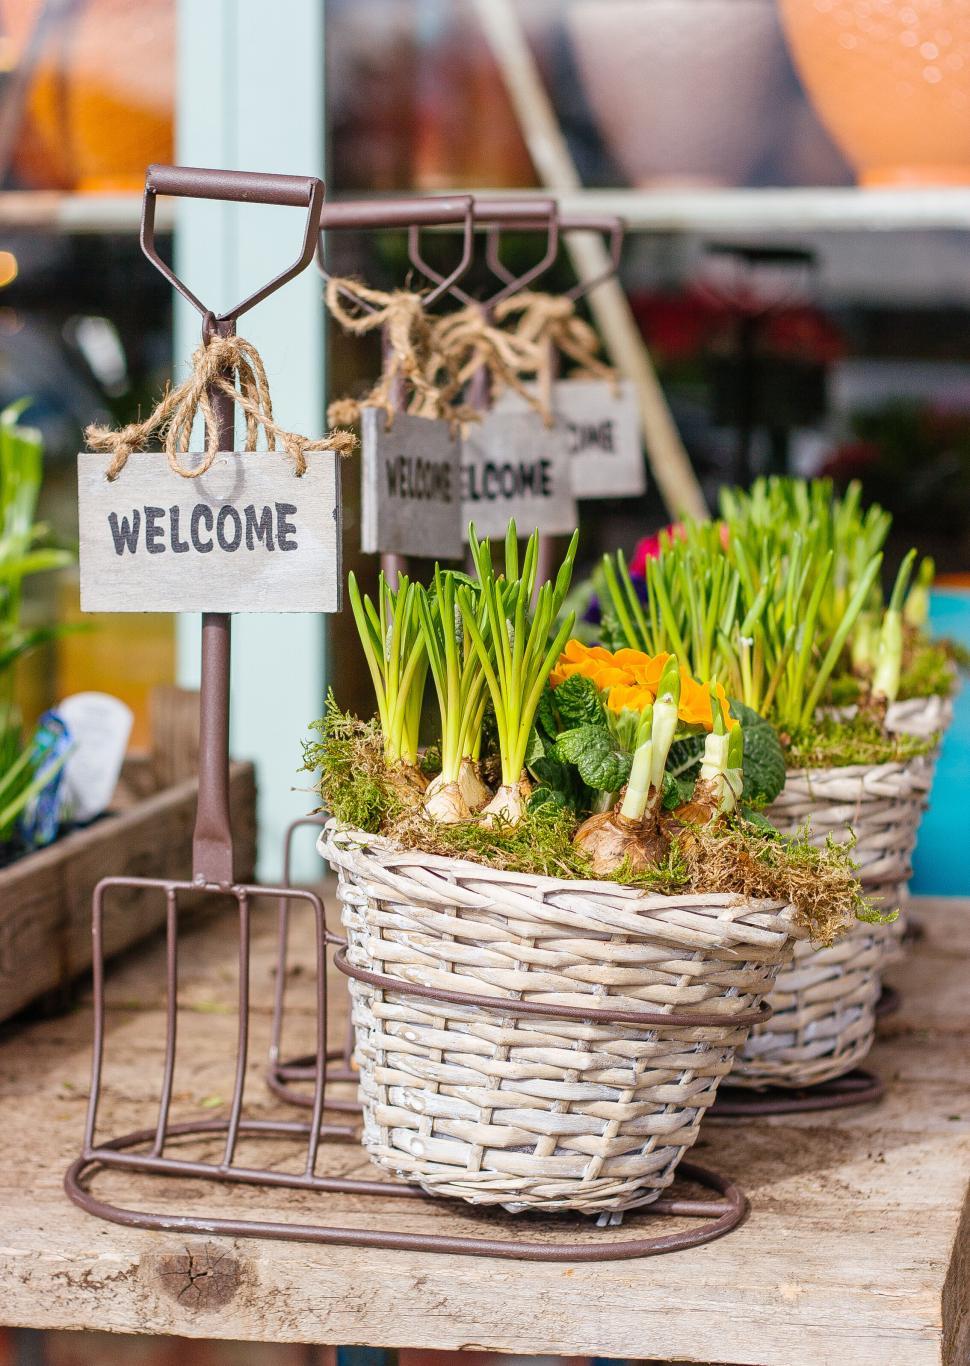 Free Image of Welcome sign on wicker baskets with plants 